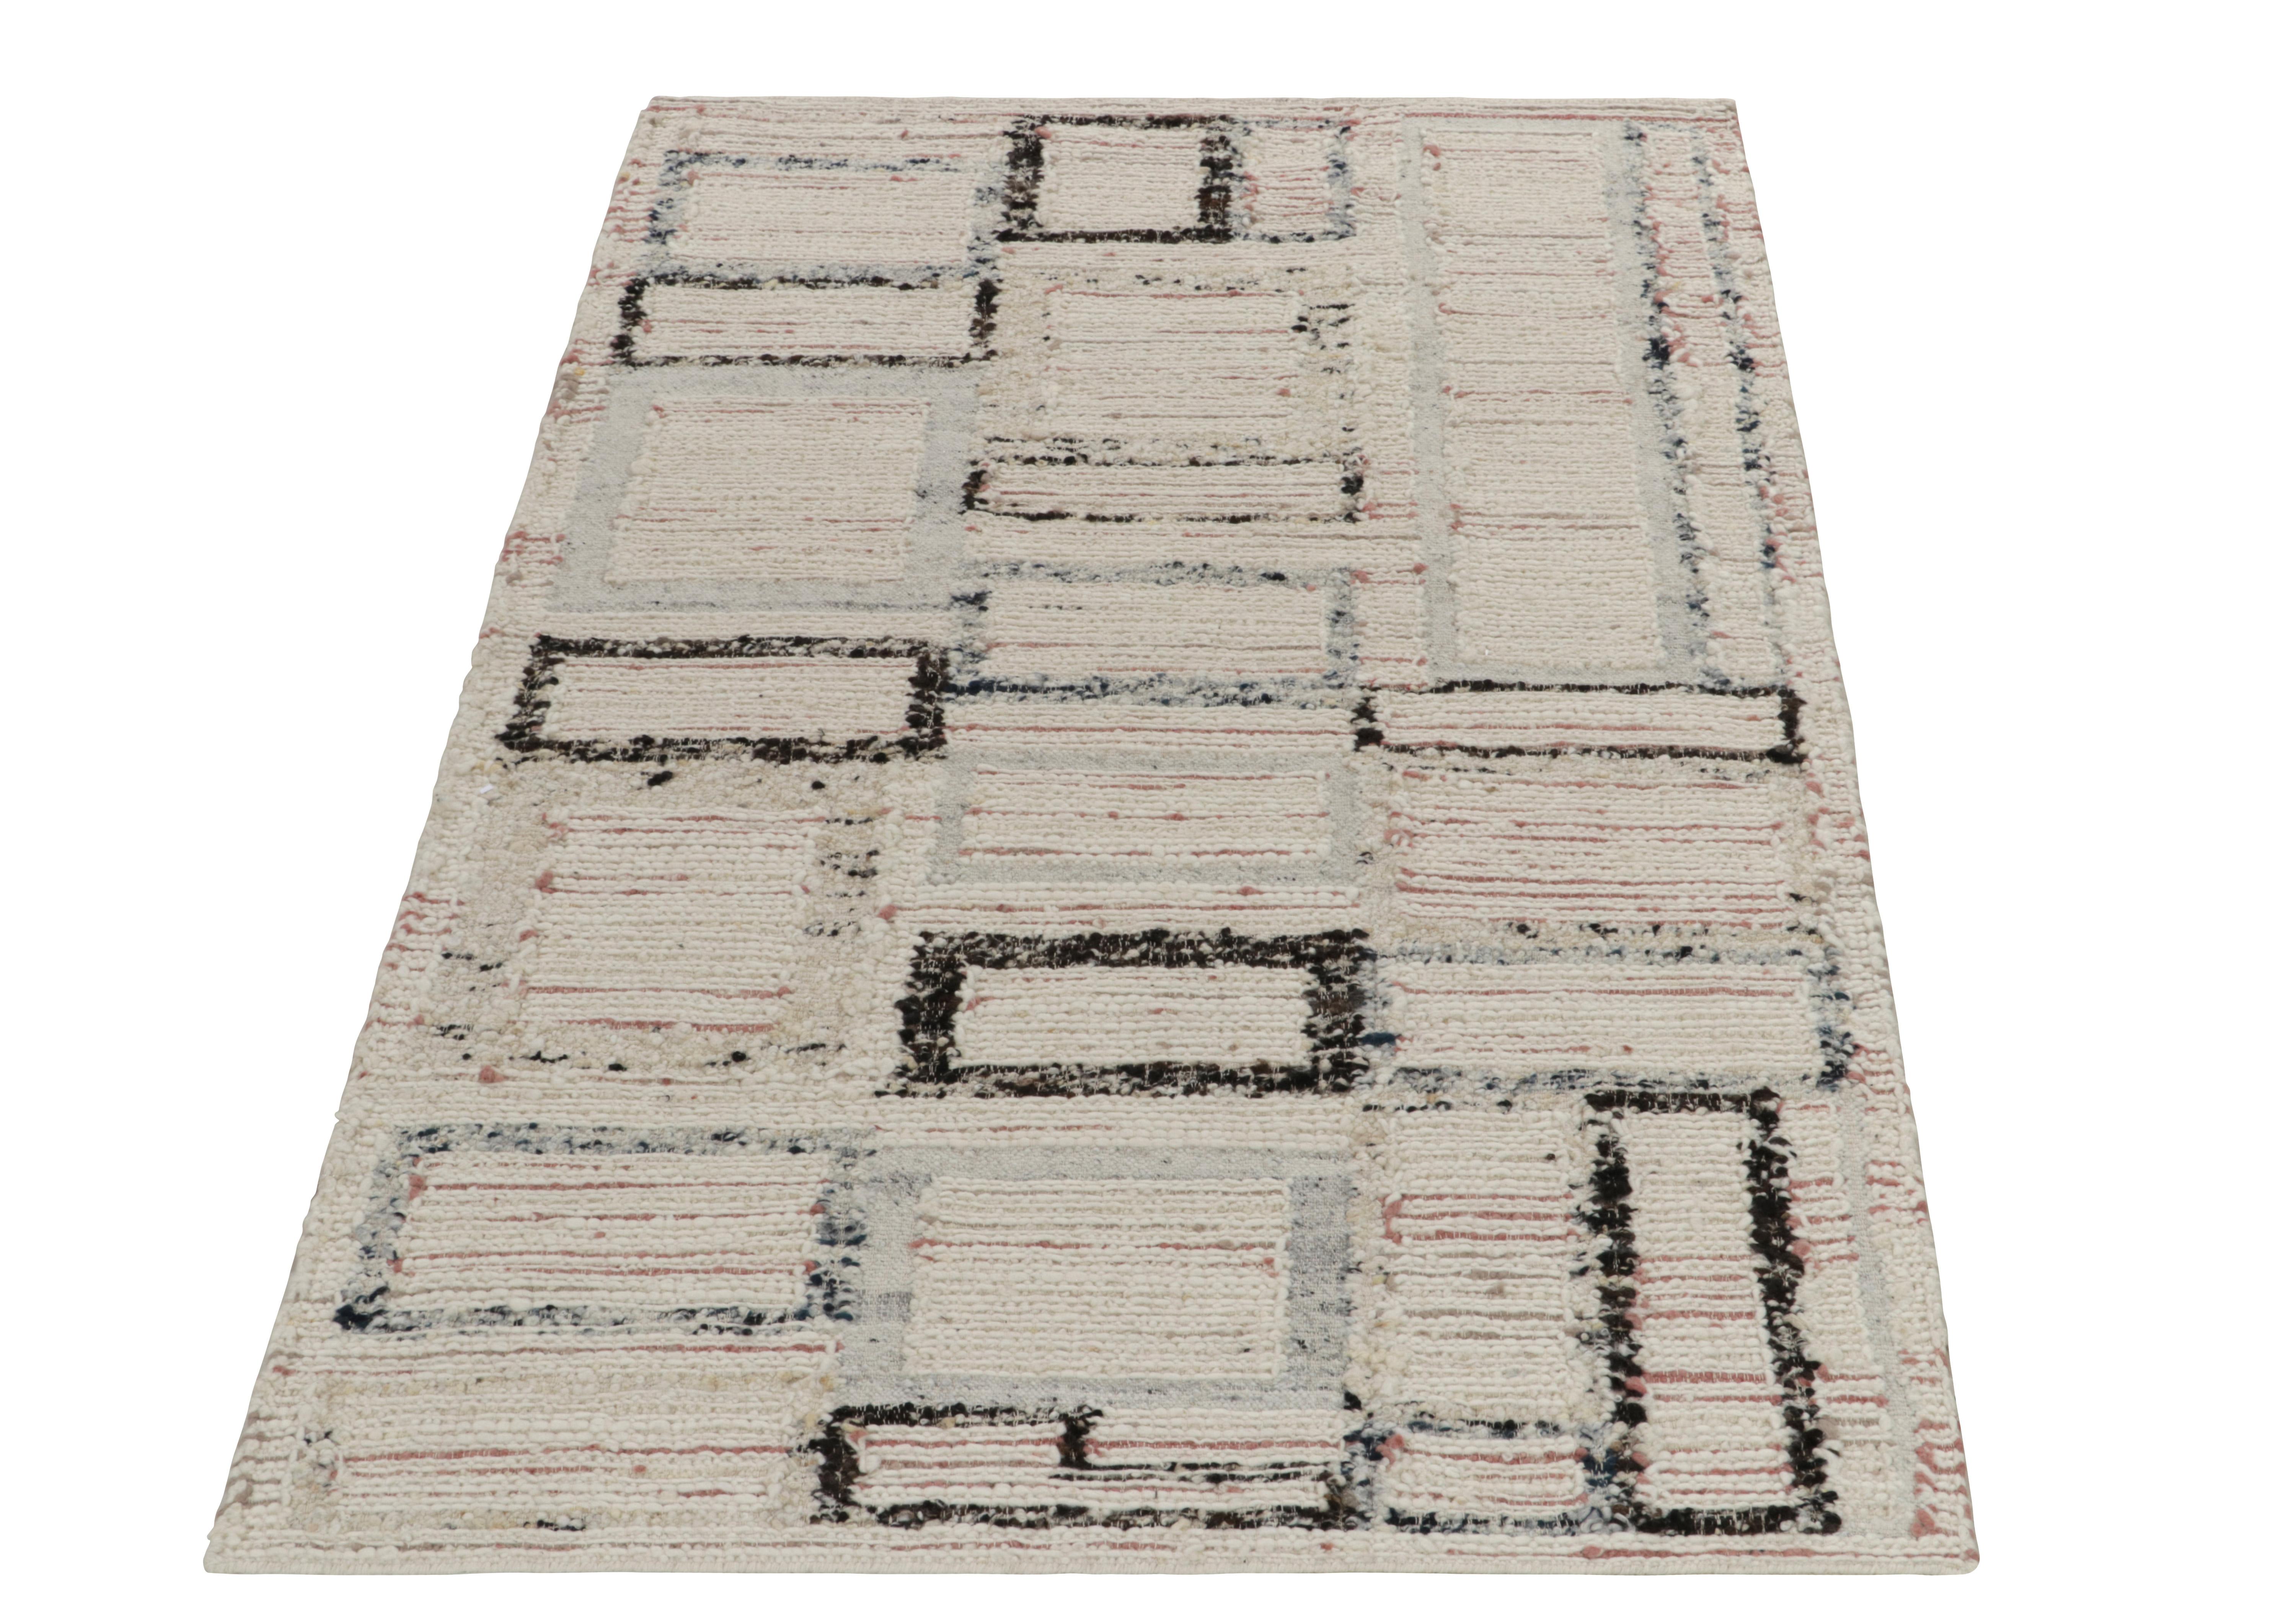 Rug & Kilim unveils its innovation in style & technique with this 5x8 flat weave rug, embracing a bold textural innovation of Deco style. The rug features a modern geometric pattern with accents of pink-red, sky blue, and black on crisp white